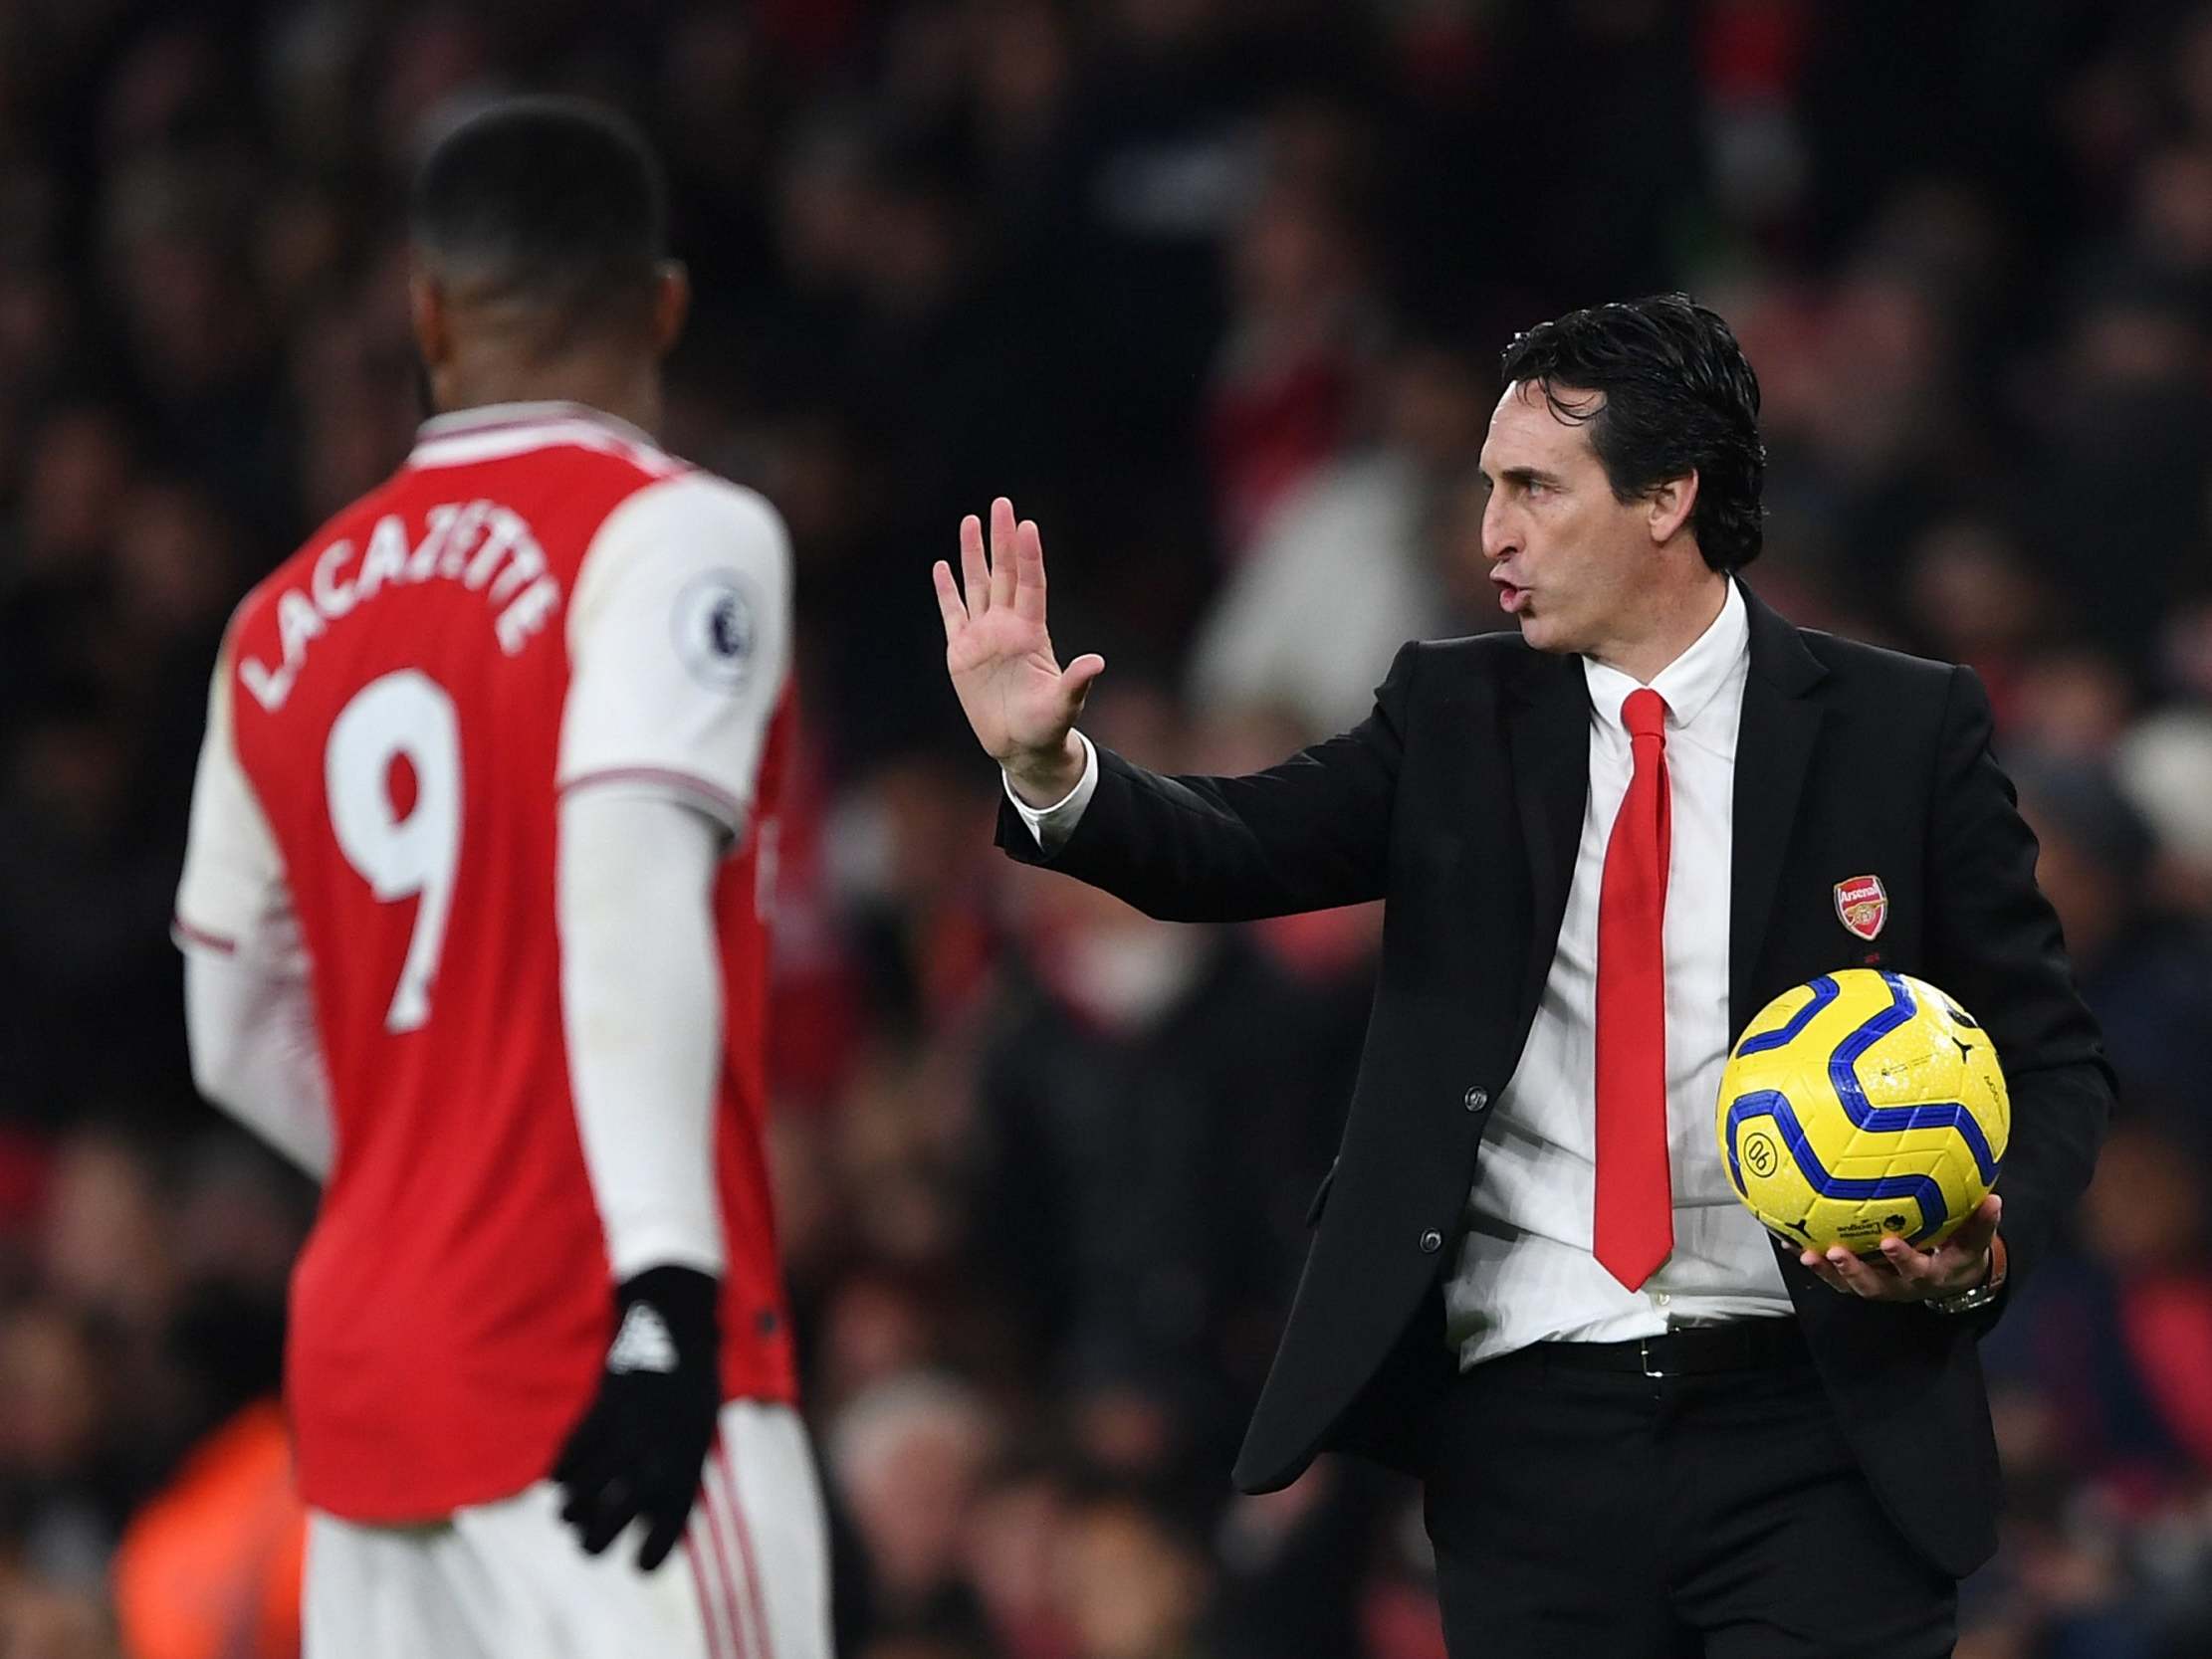 Unai Emery is under pressure after a run of poor results